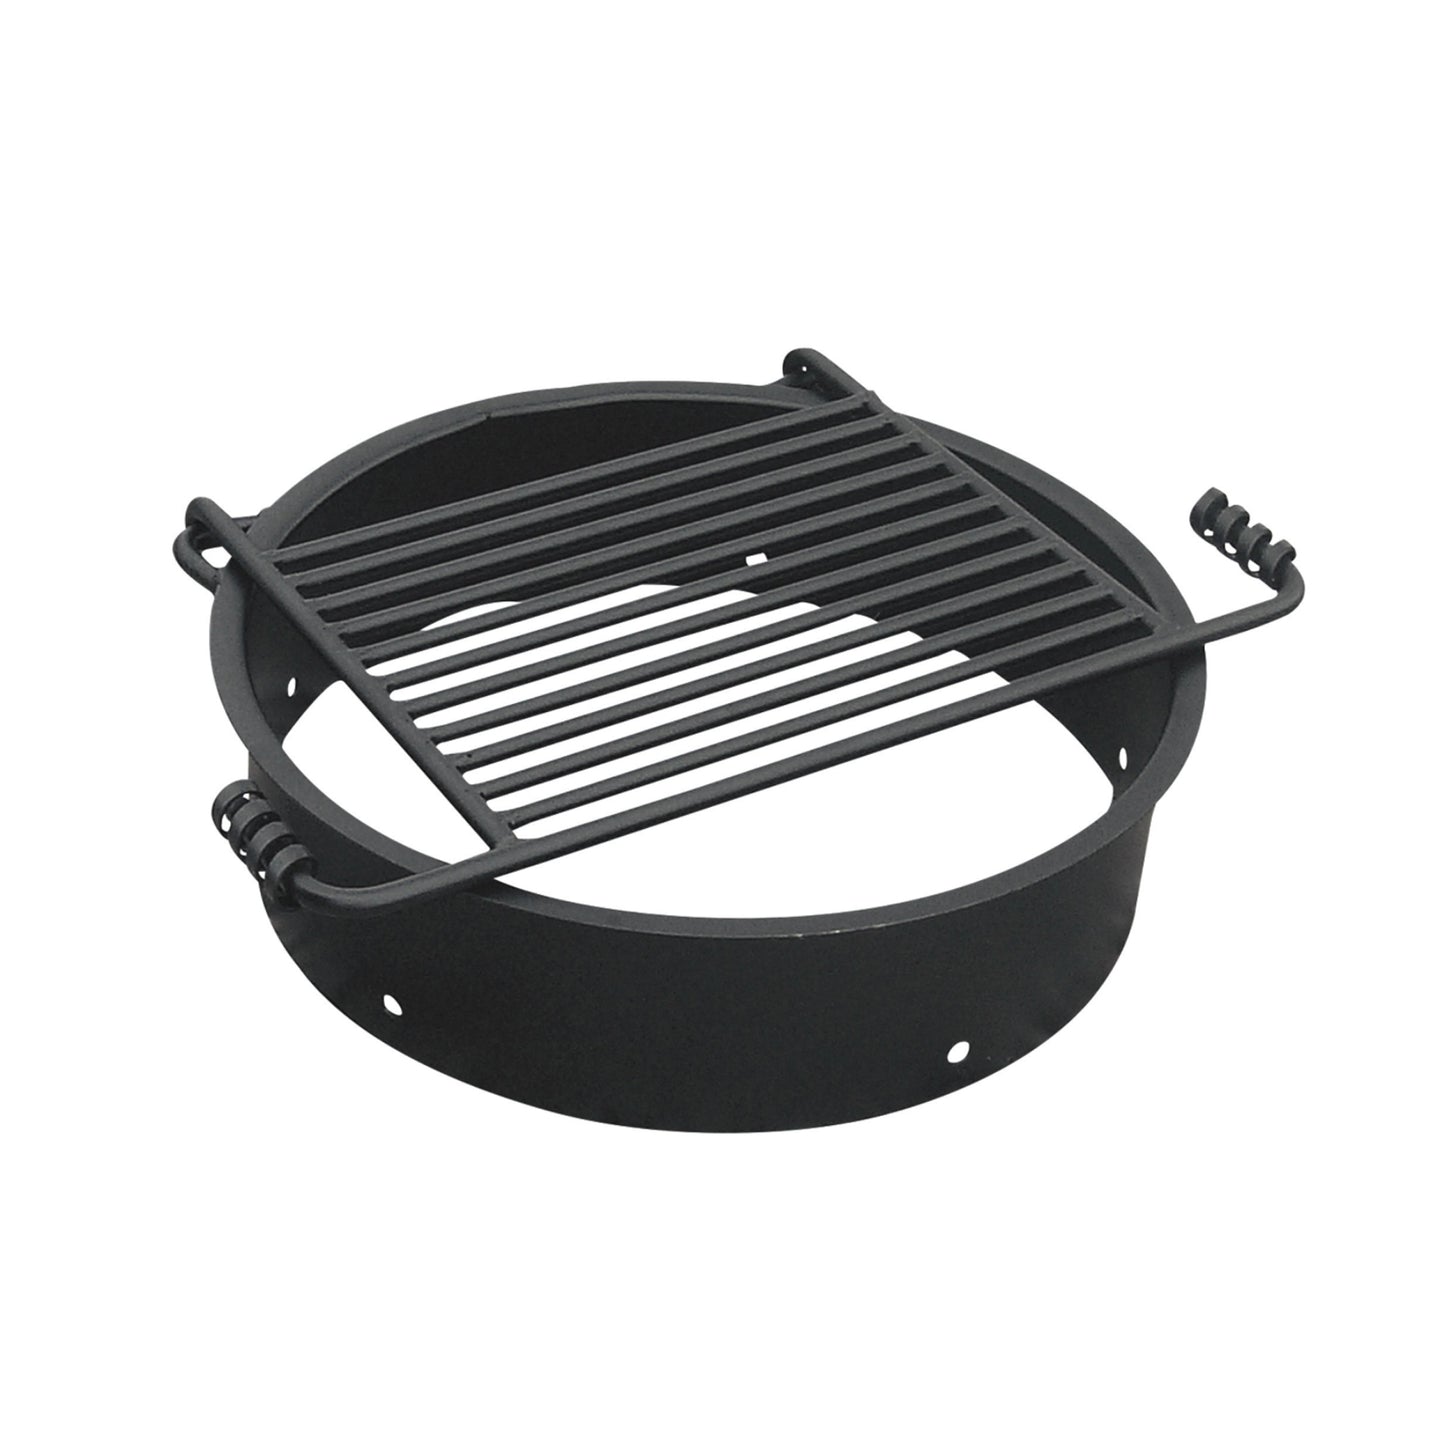 Campfire Ring with Single Level Cooking Grate - 26"